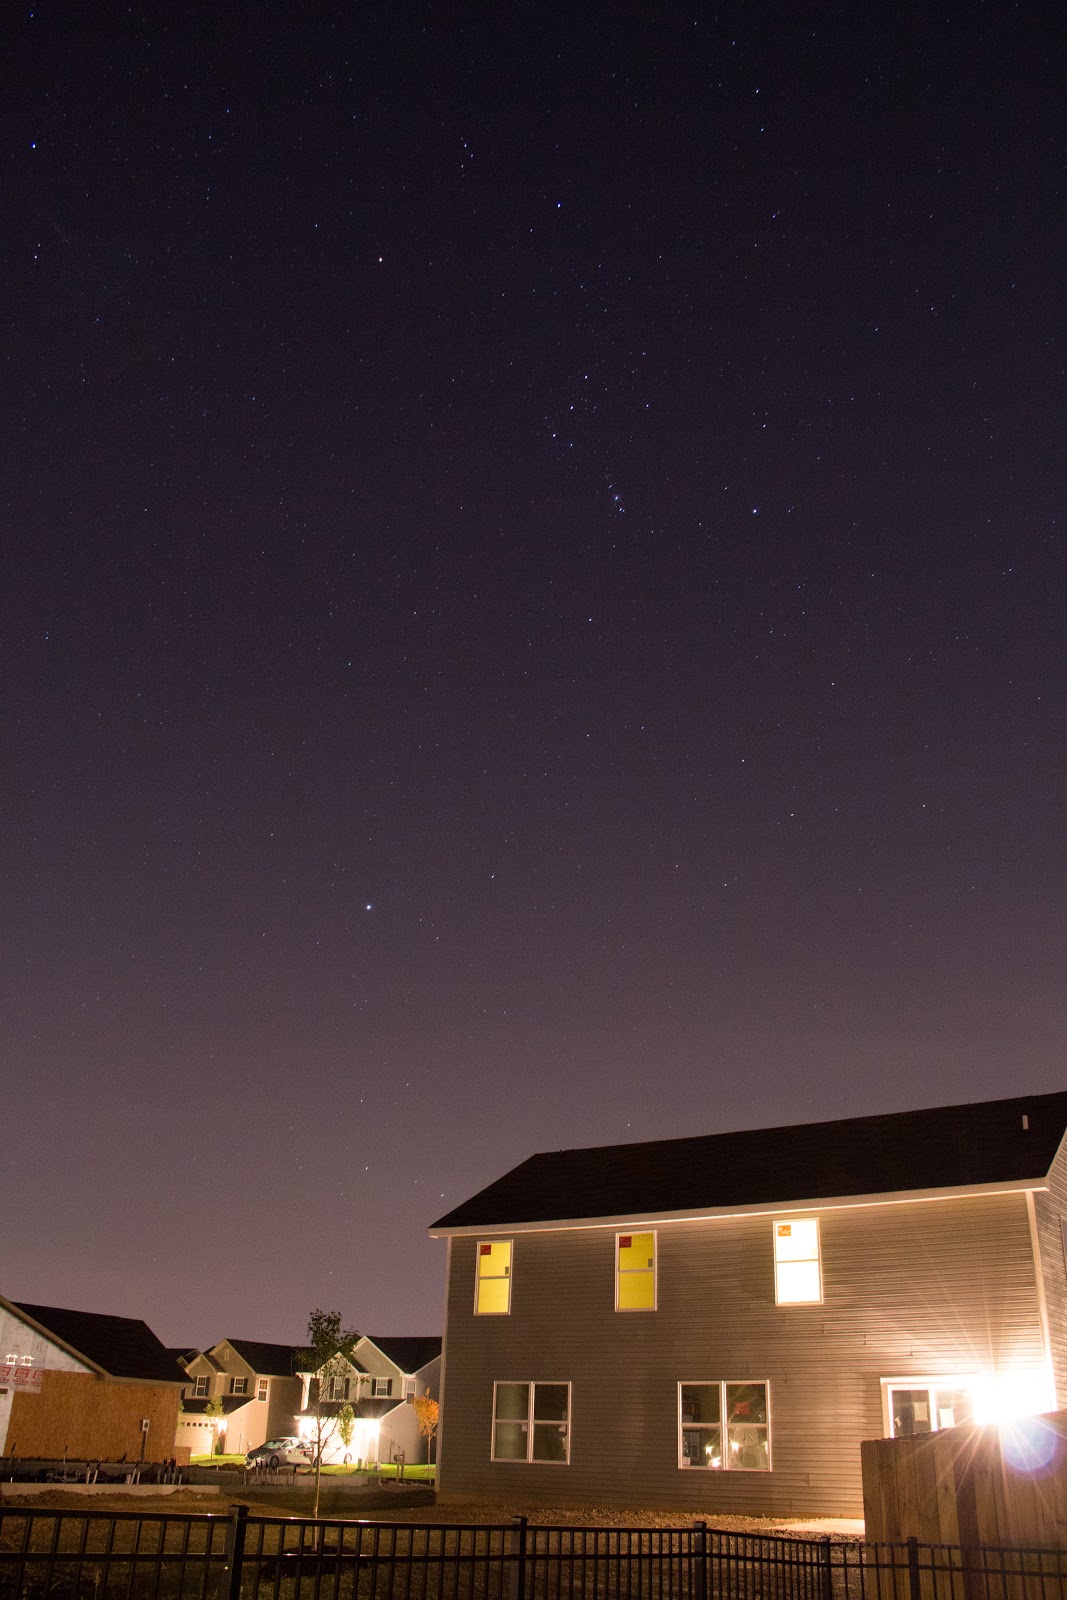 orion constellation over house